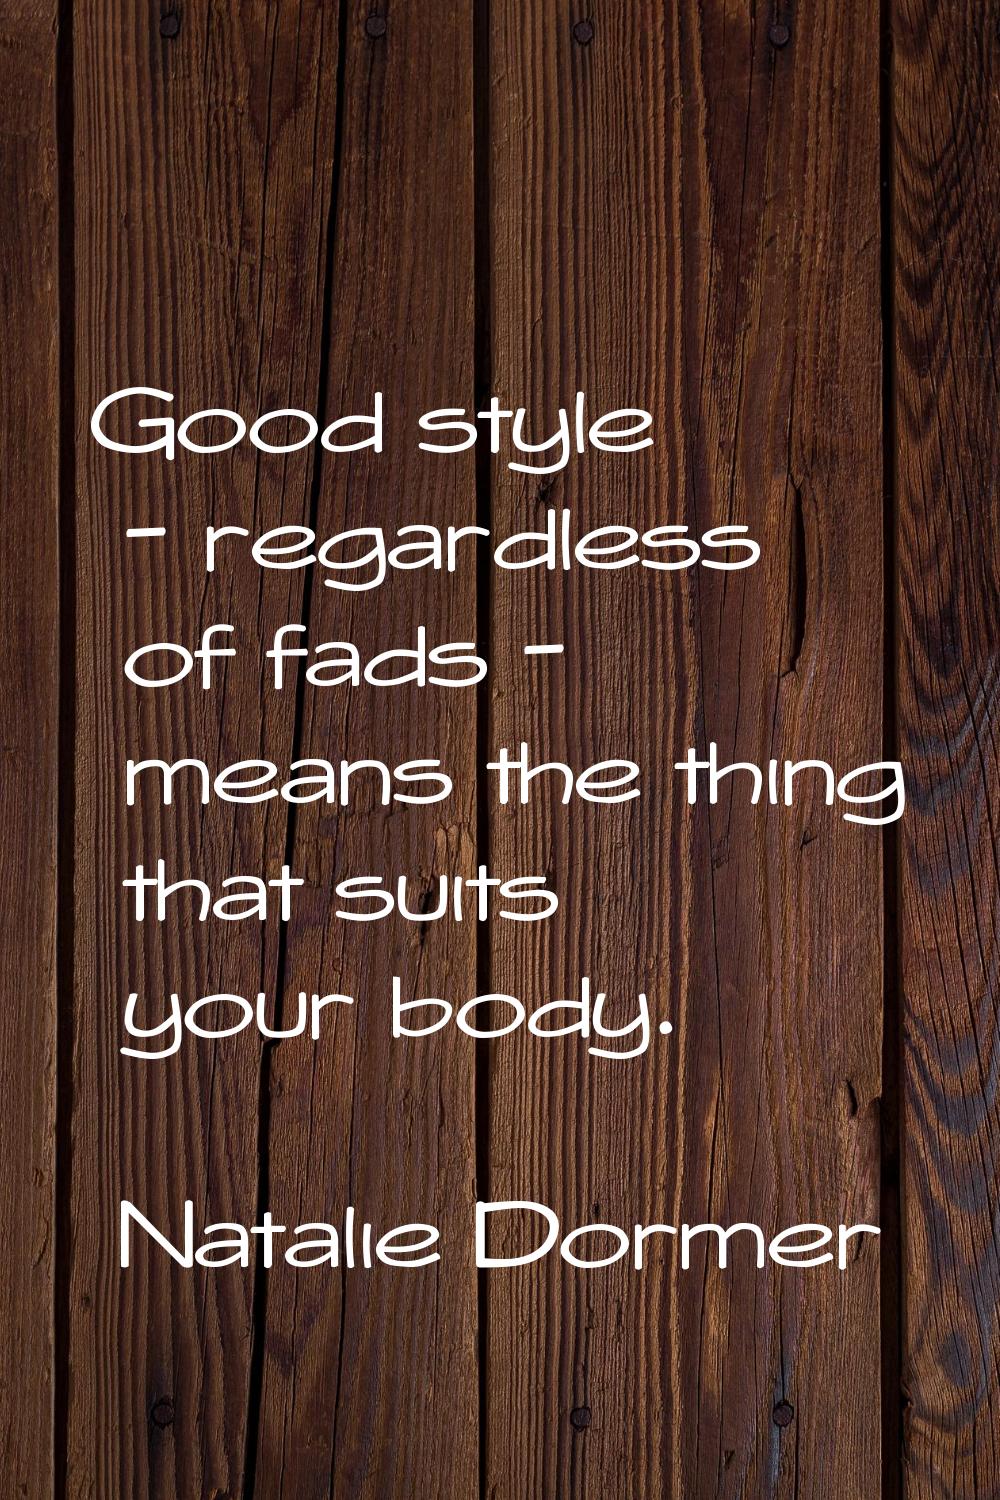 Good style - regardless of fads - means the thing that suits your body.